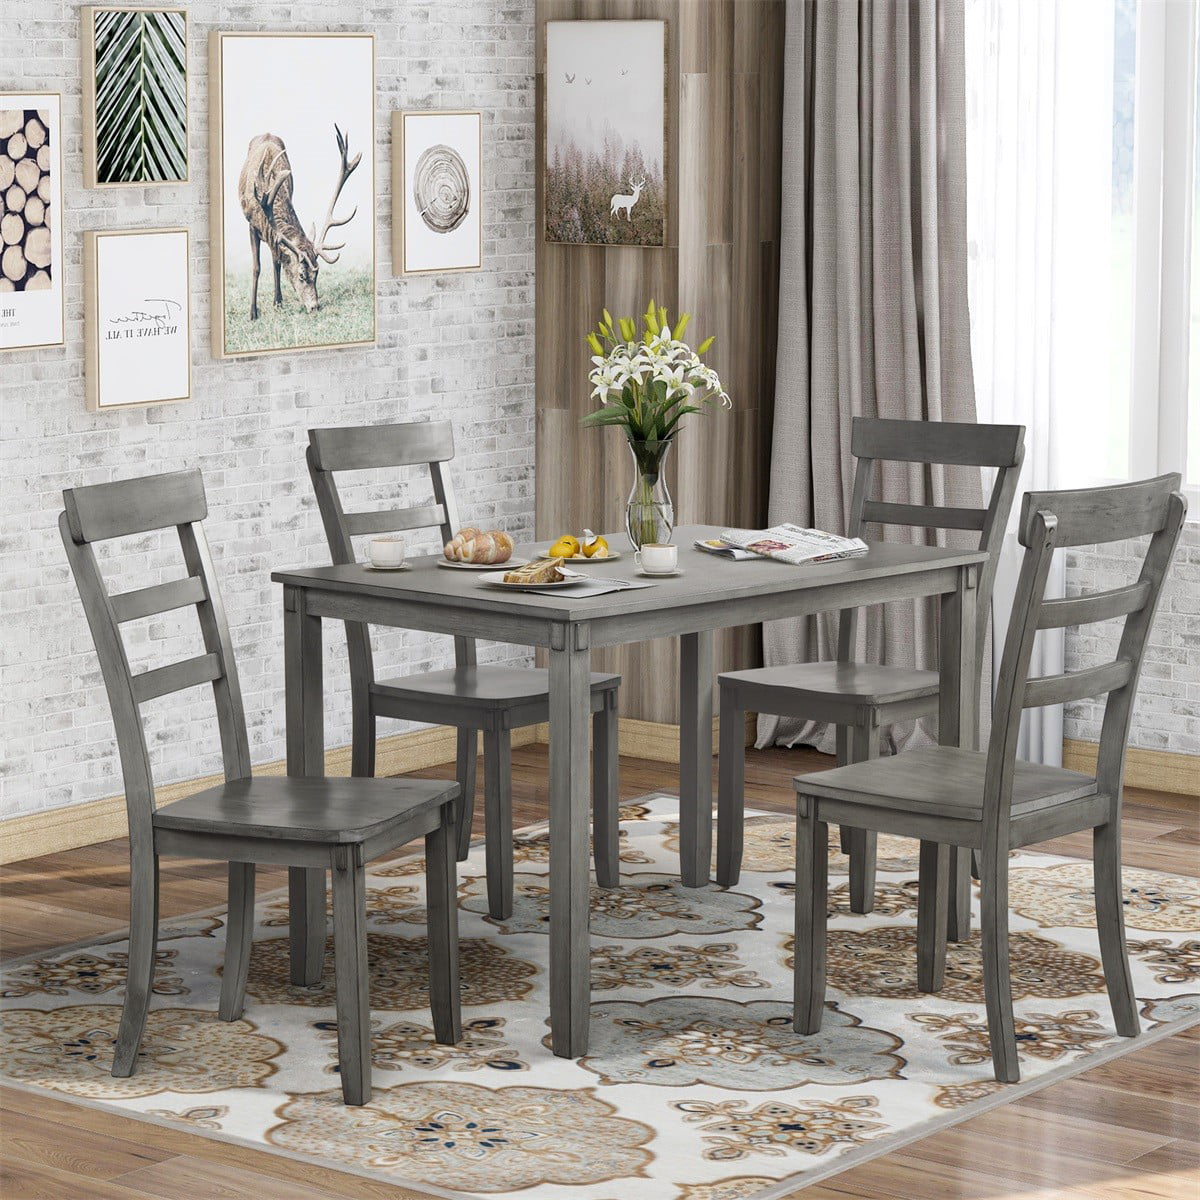 SENTERN 5 Piece Dining Table Set Wood Table and 4 Chairs for Dining